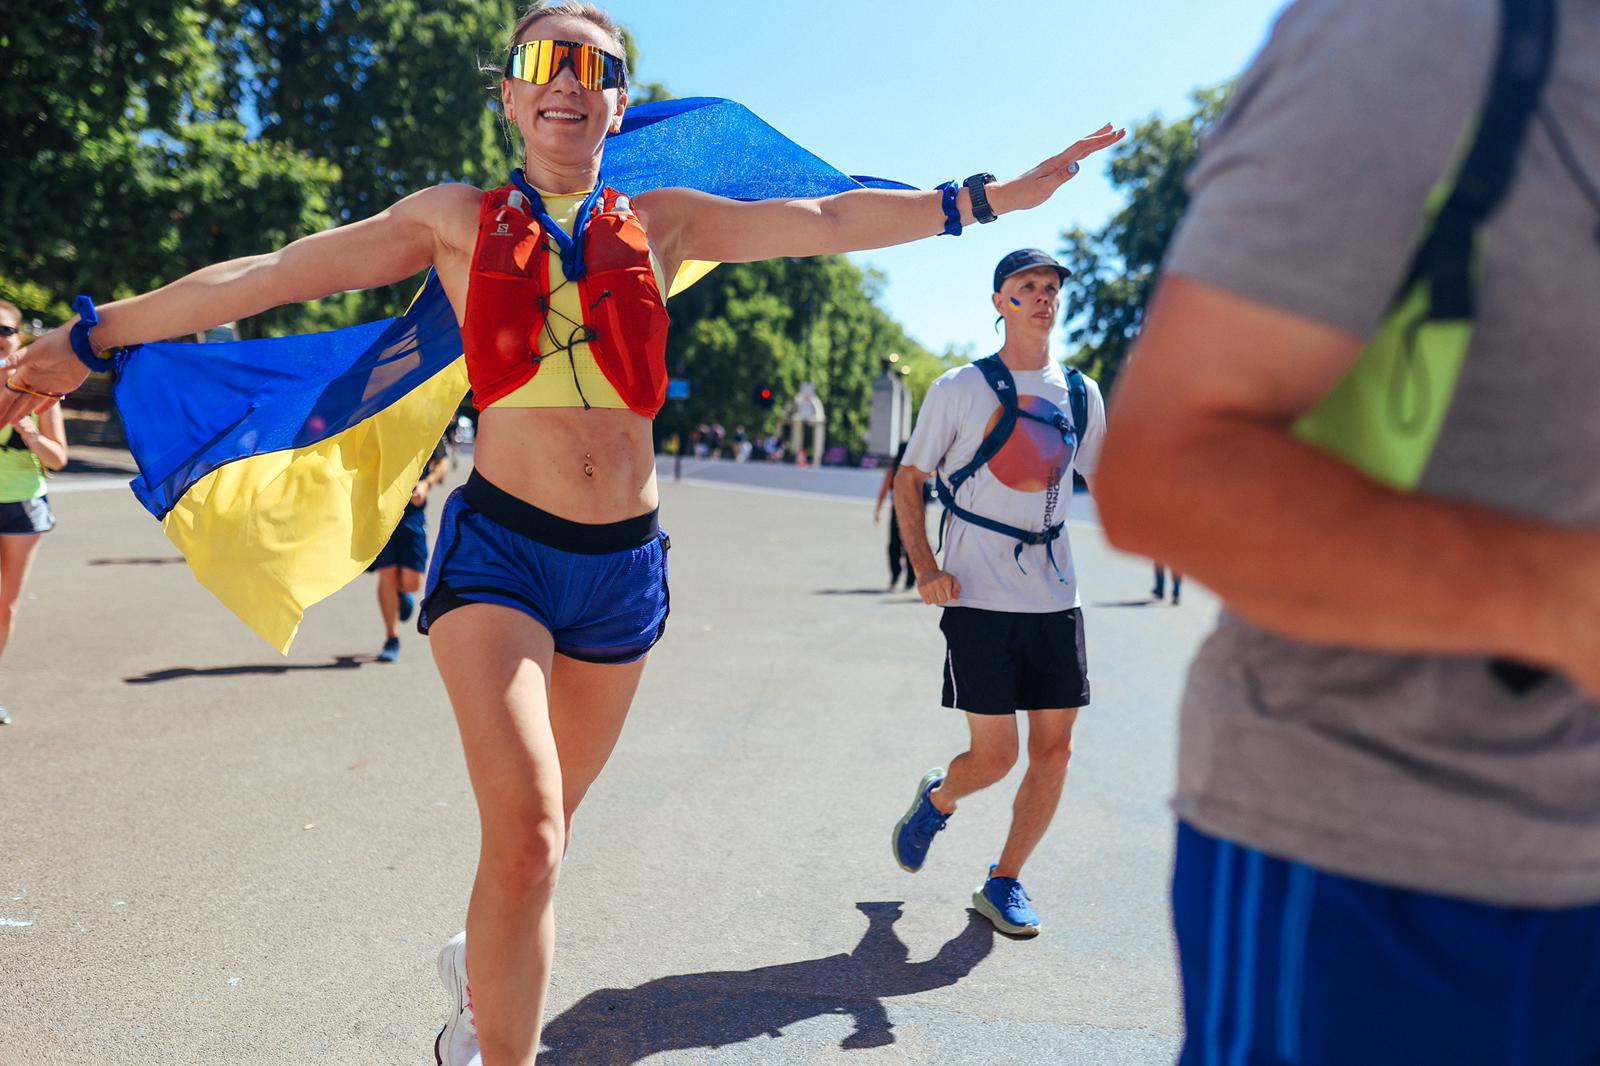 In the shoes of Olga Stignii, running 31km every day for 31 days